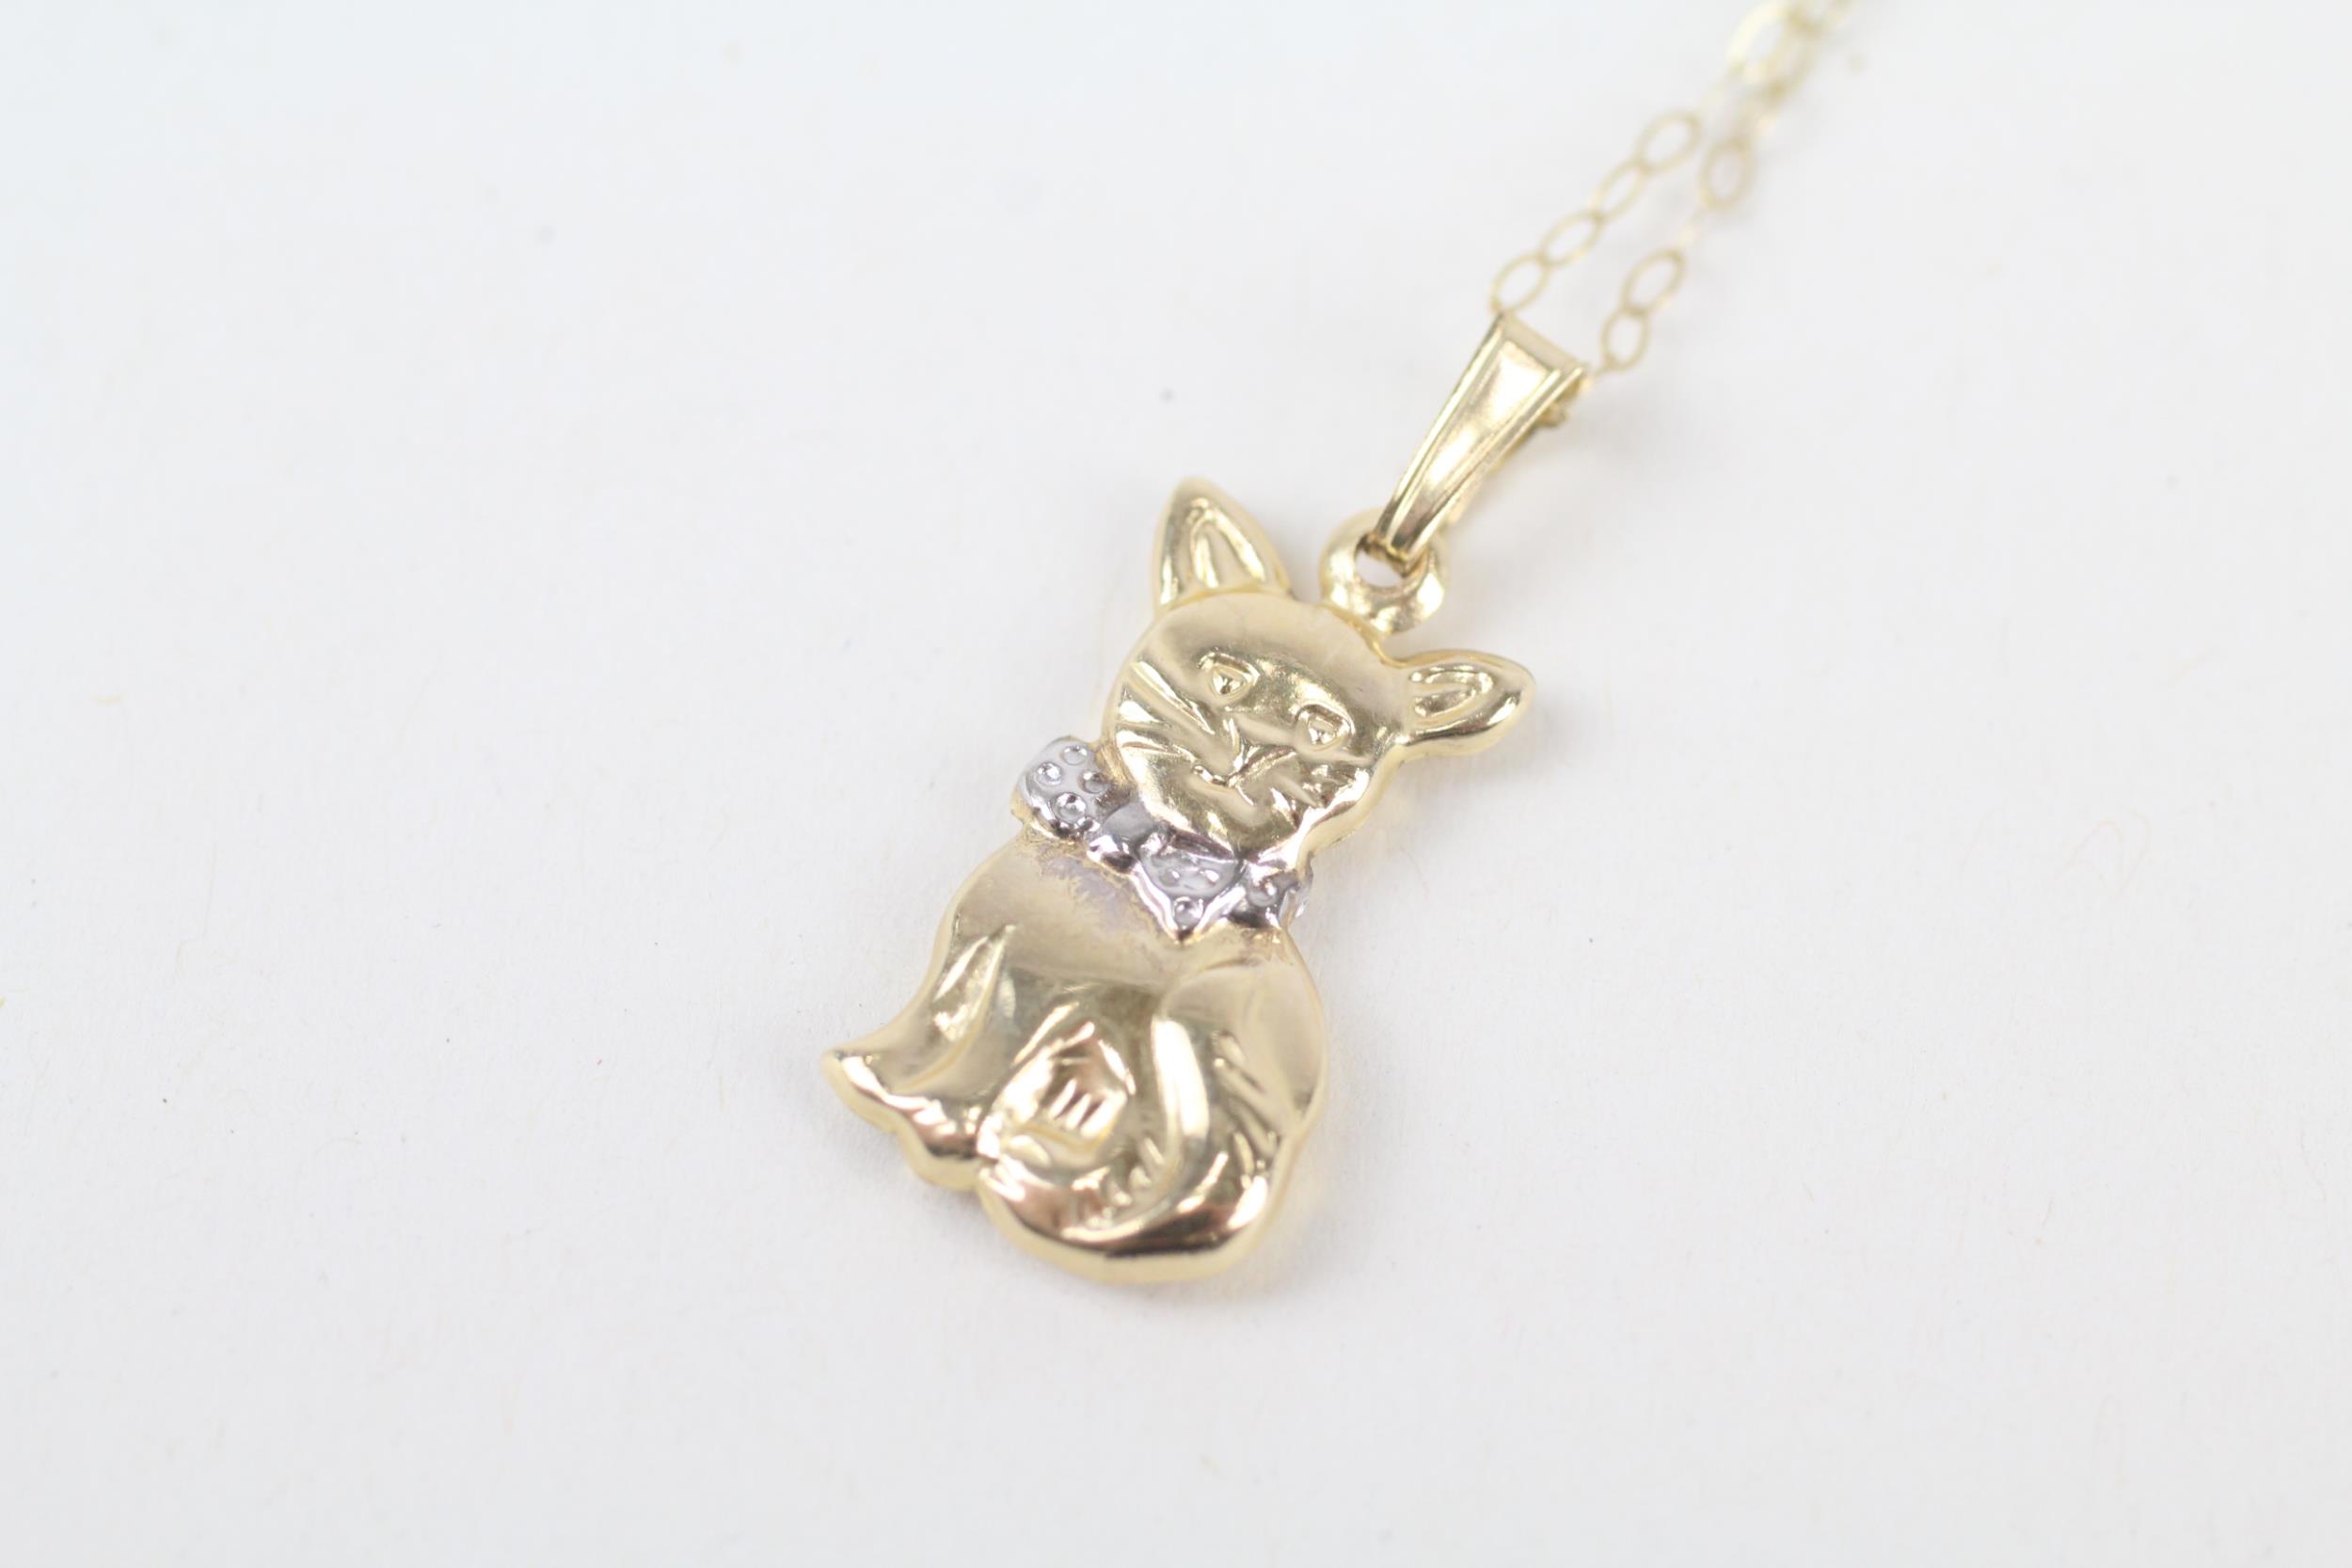 9ct gold cat pendant necklace - Image 4 of 4